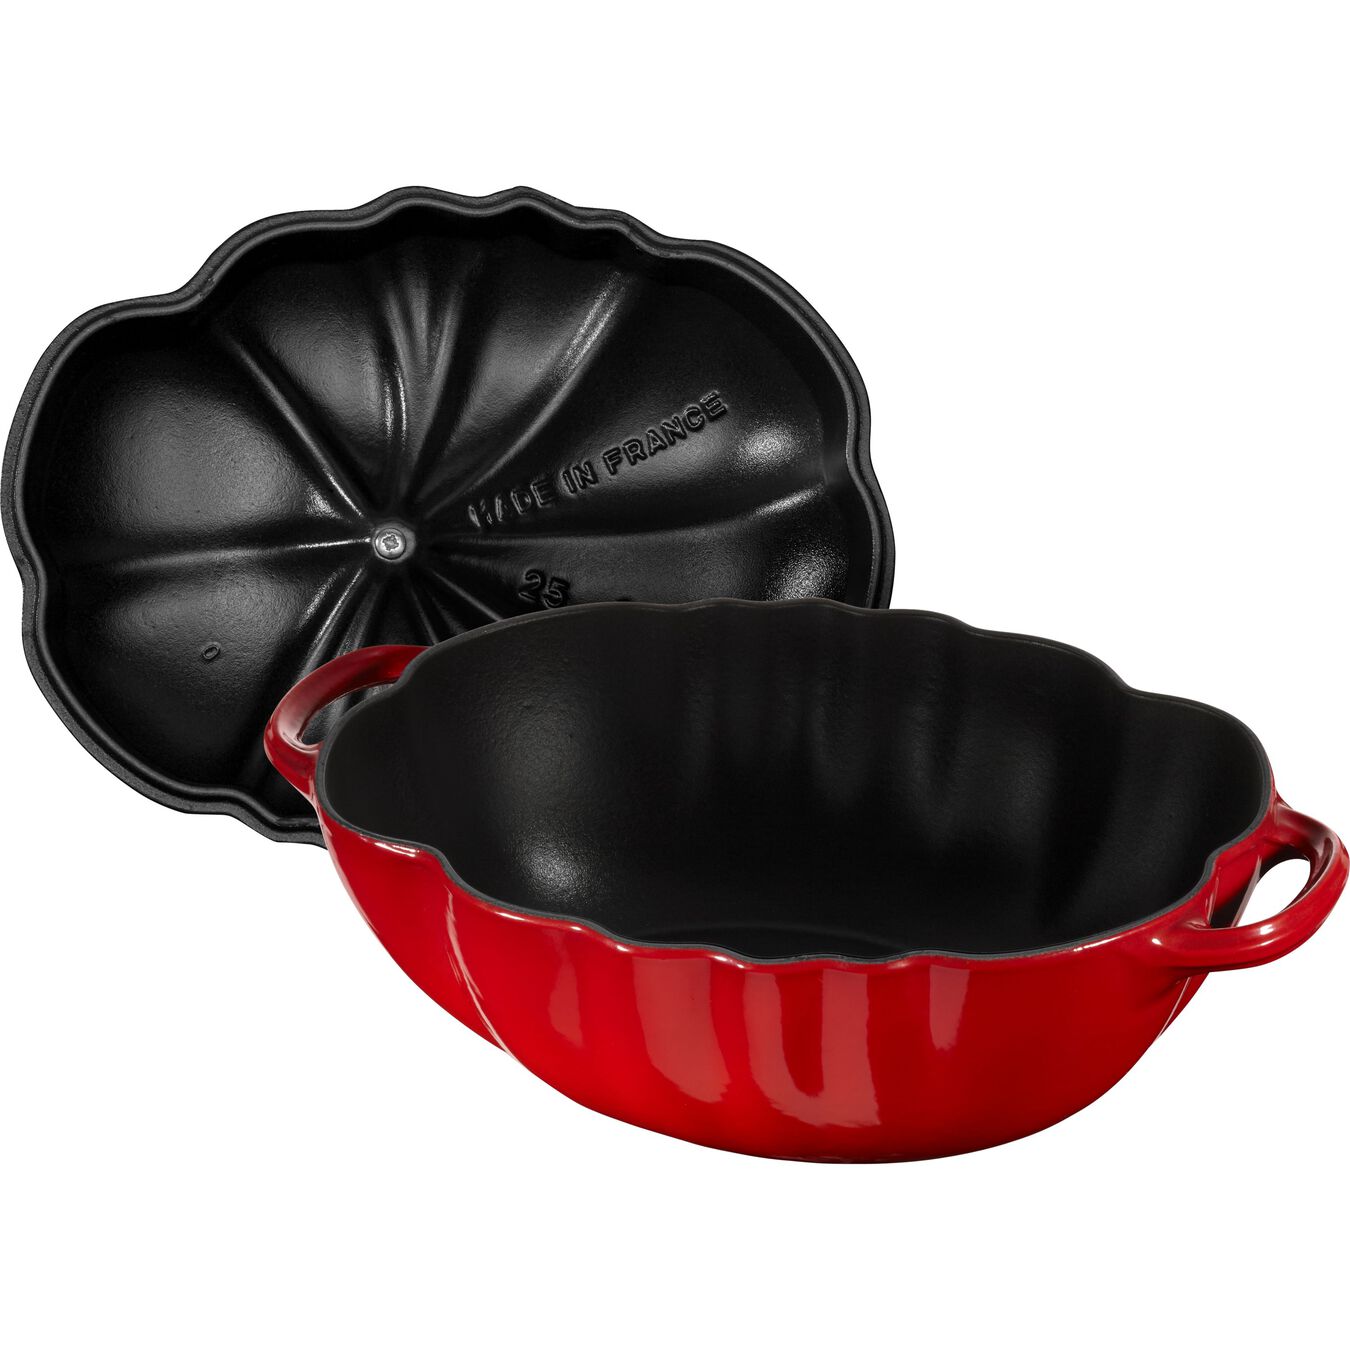 Cocotte 25 cm, Tomate, Kirsch-Rot, Gusseisen,,large 8